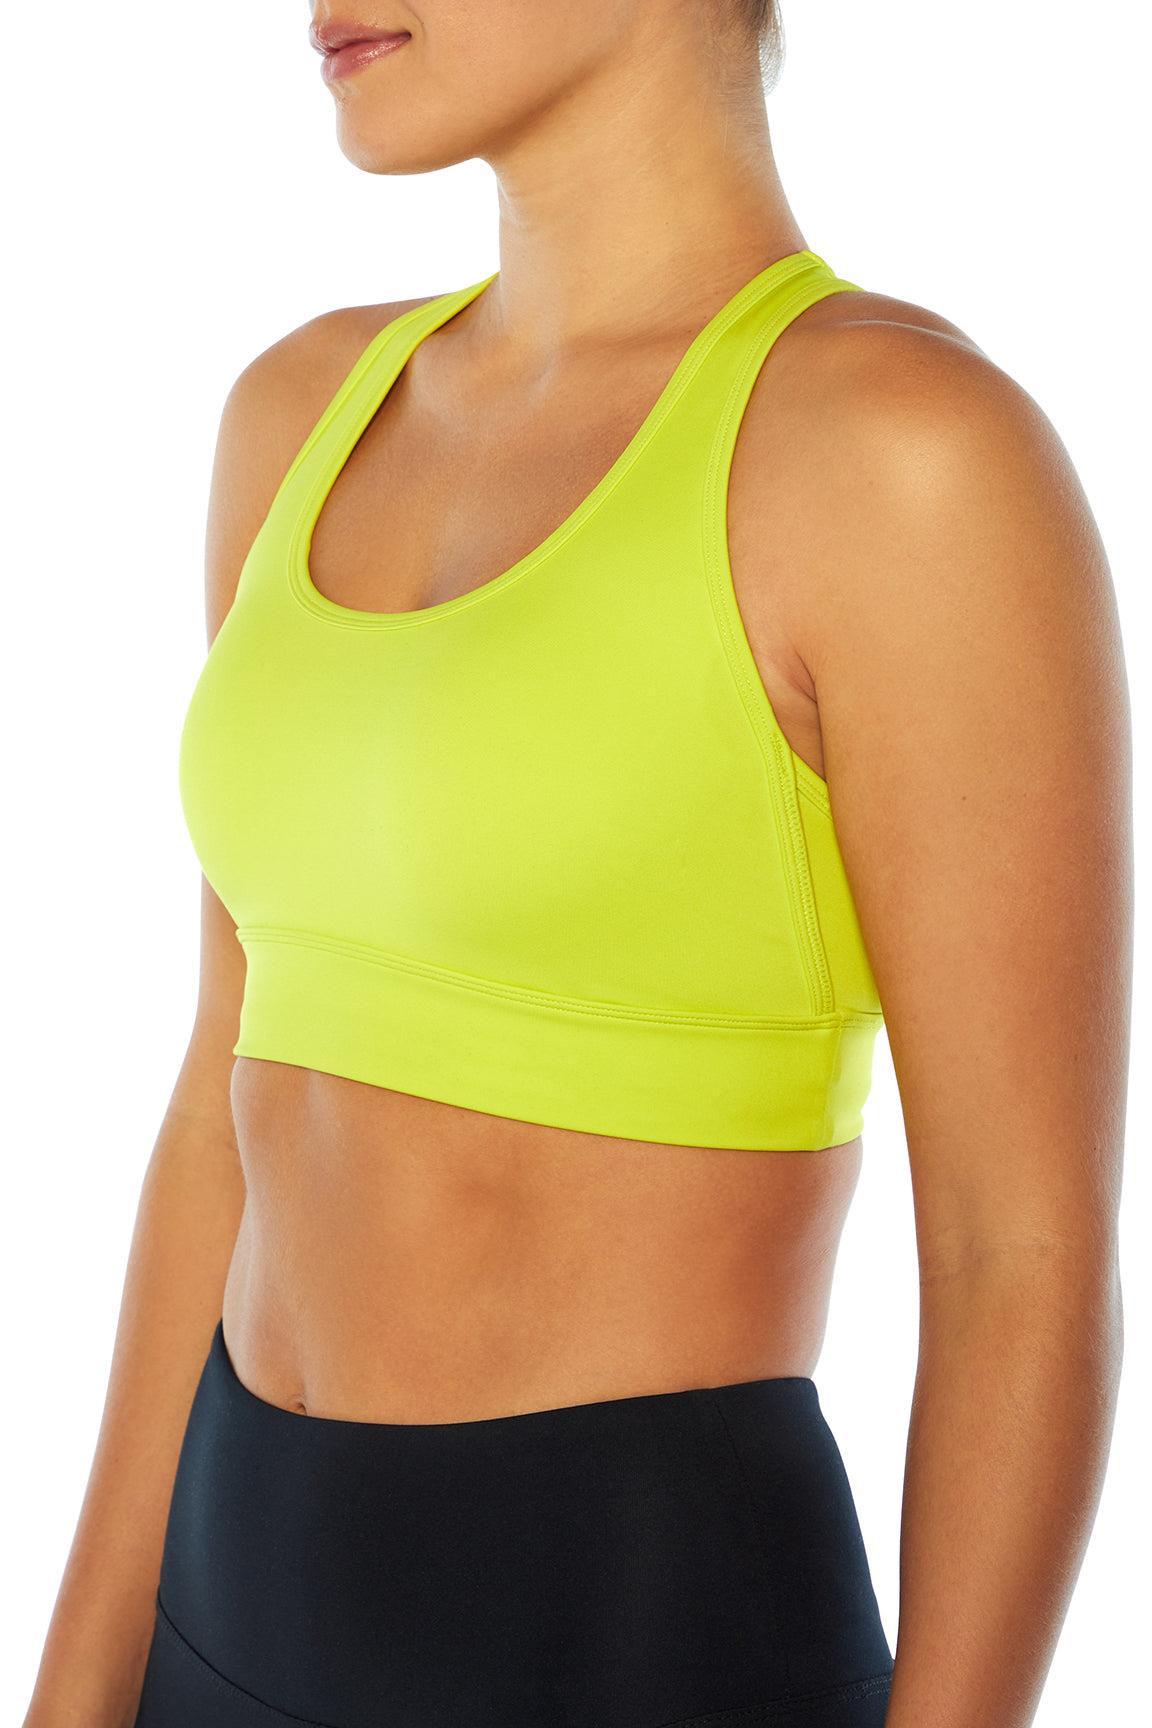 Marika Medium Impact Sports Bra Non-Wired Removable Padding Gym Top Cycle House